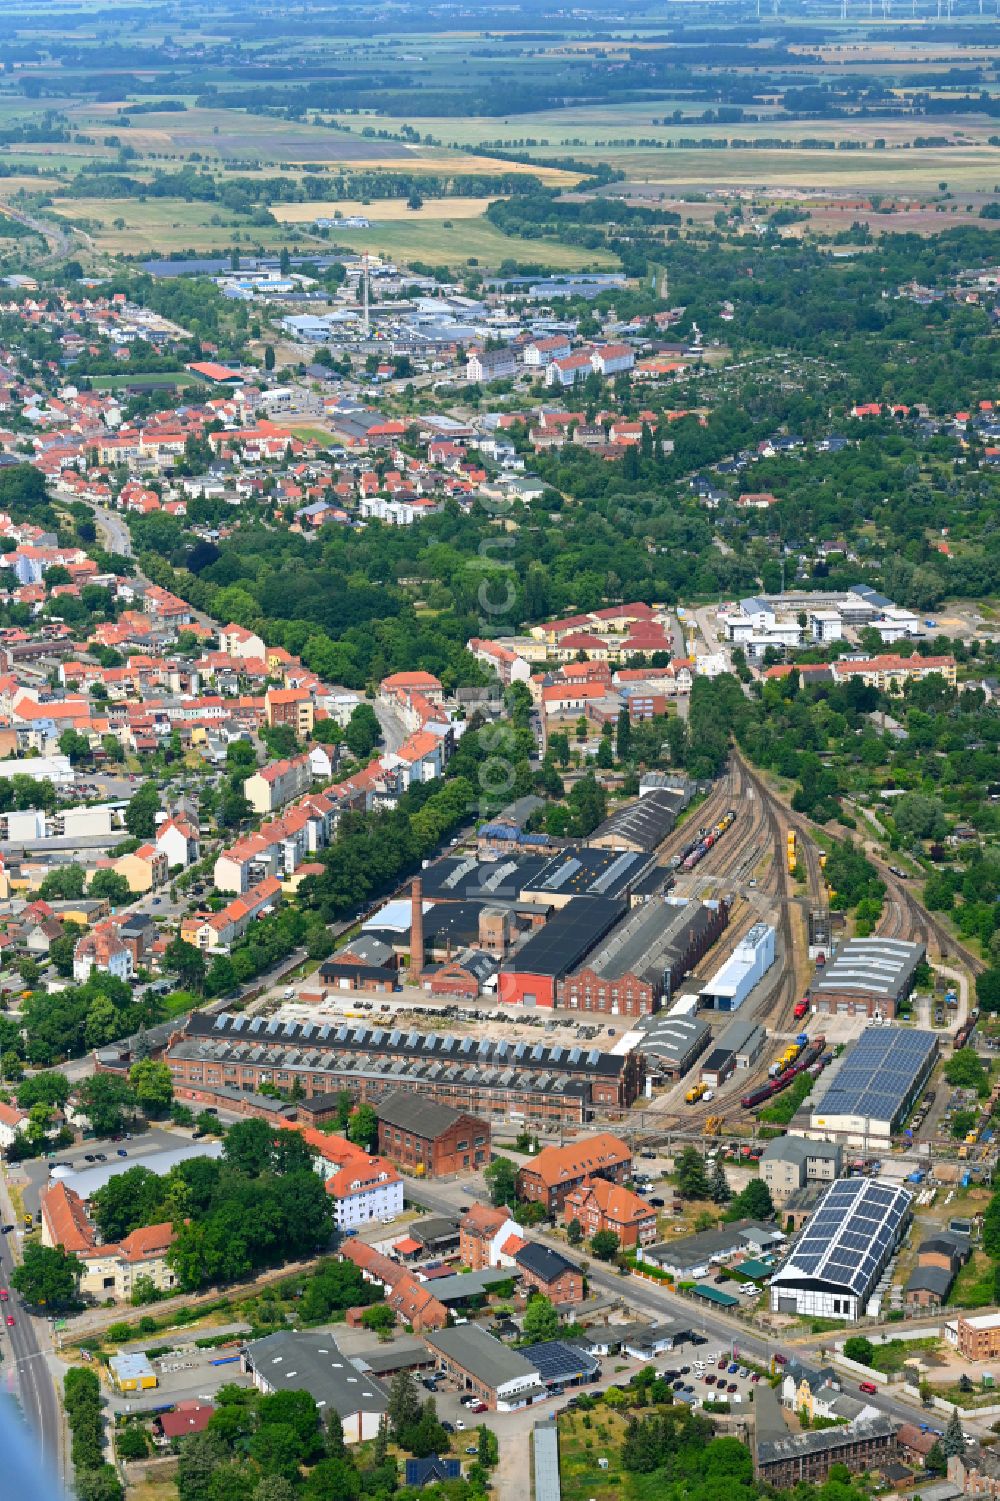 Aerial image Hansestadt Stendal - Railway depot and repair shop, maintenance and repair of locomotives and traction vehicles Alstom Lokomotiven Service in Hansestadt Stendal in the state Saxony-Anhalt, Germany